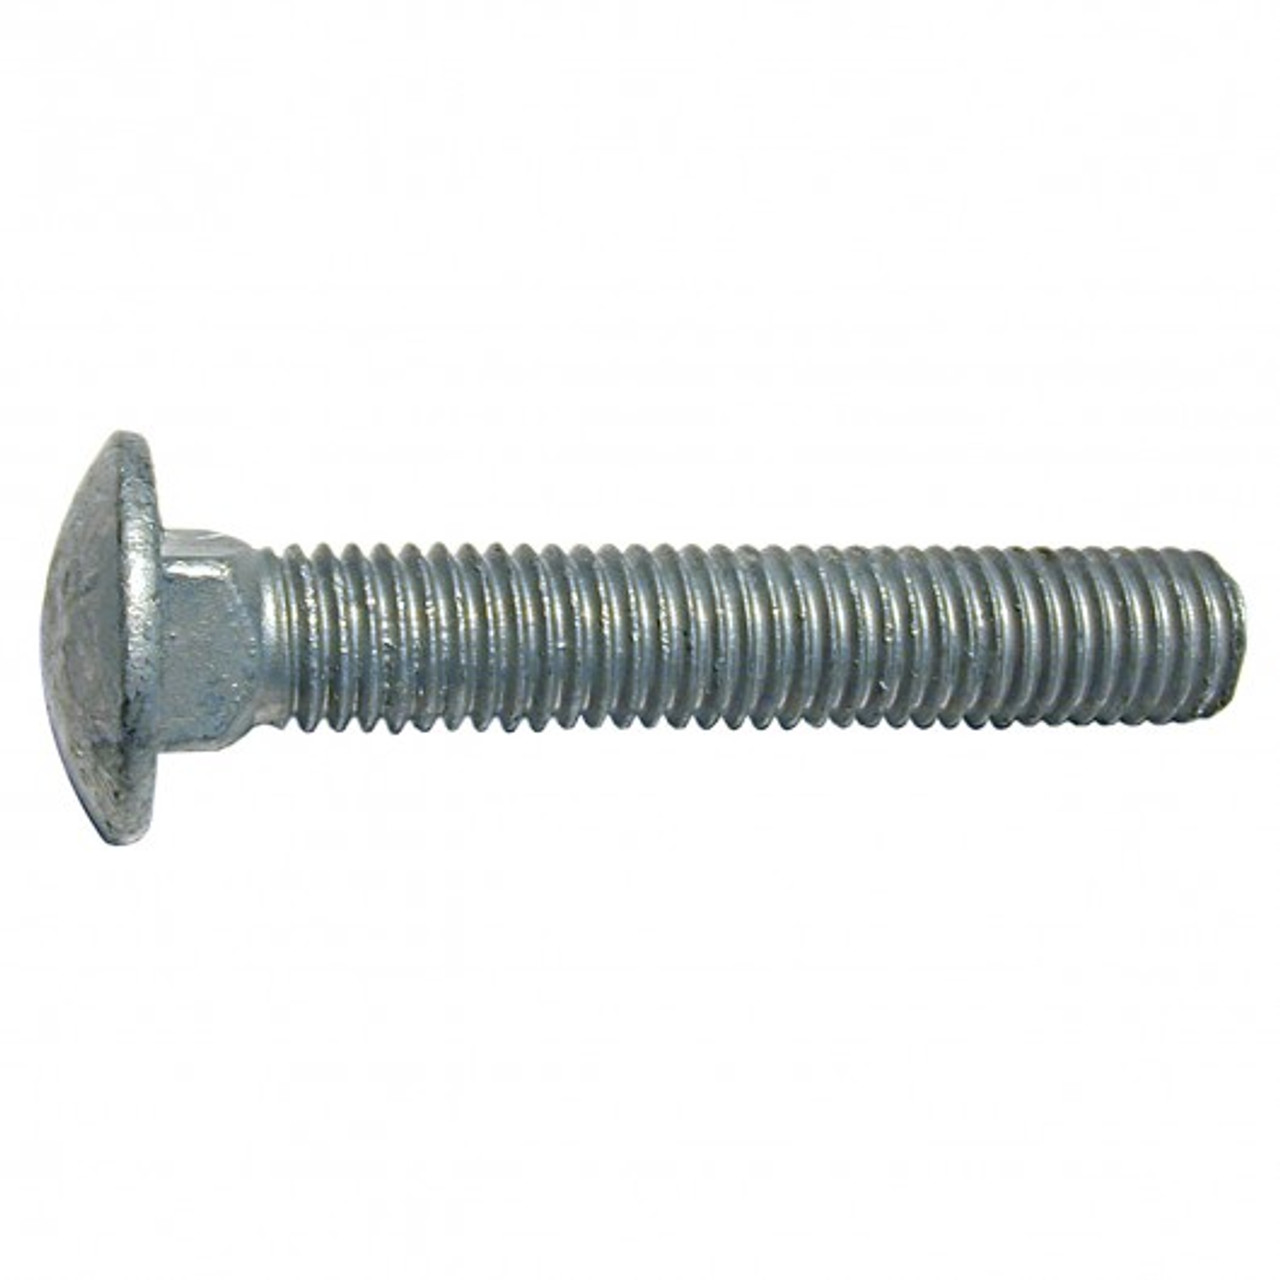 1/2X3 1/2 CARRIAGE BOLT UNC GALV